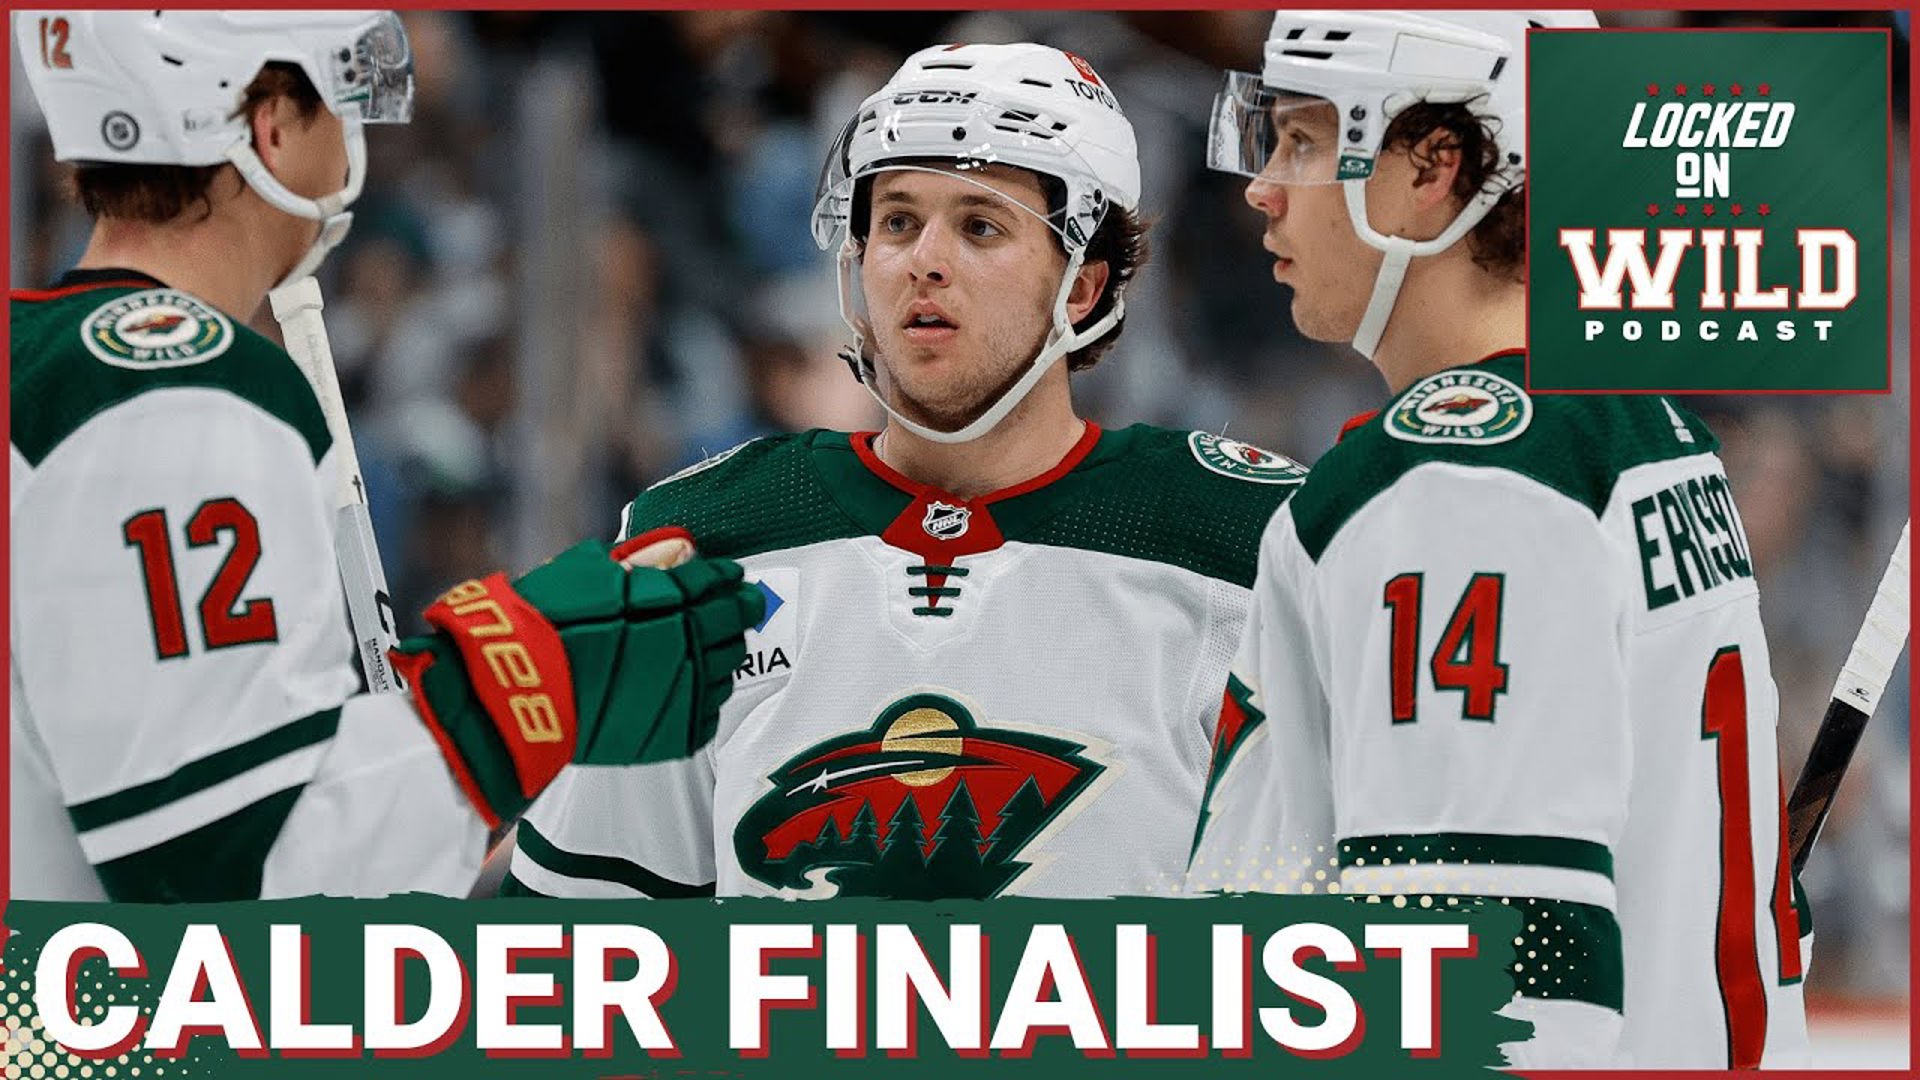 One Final Case for Brock Faber to Win the Calder!